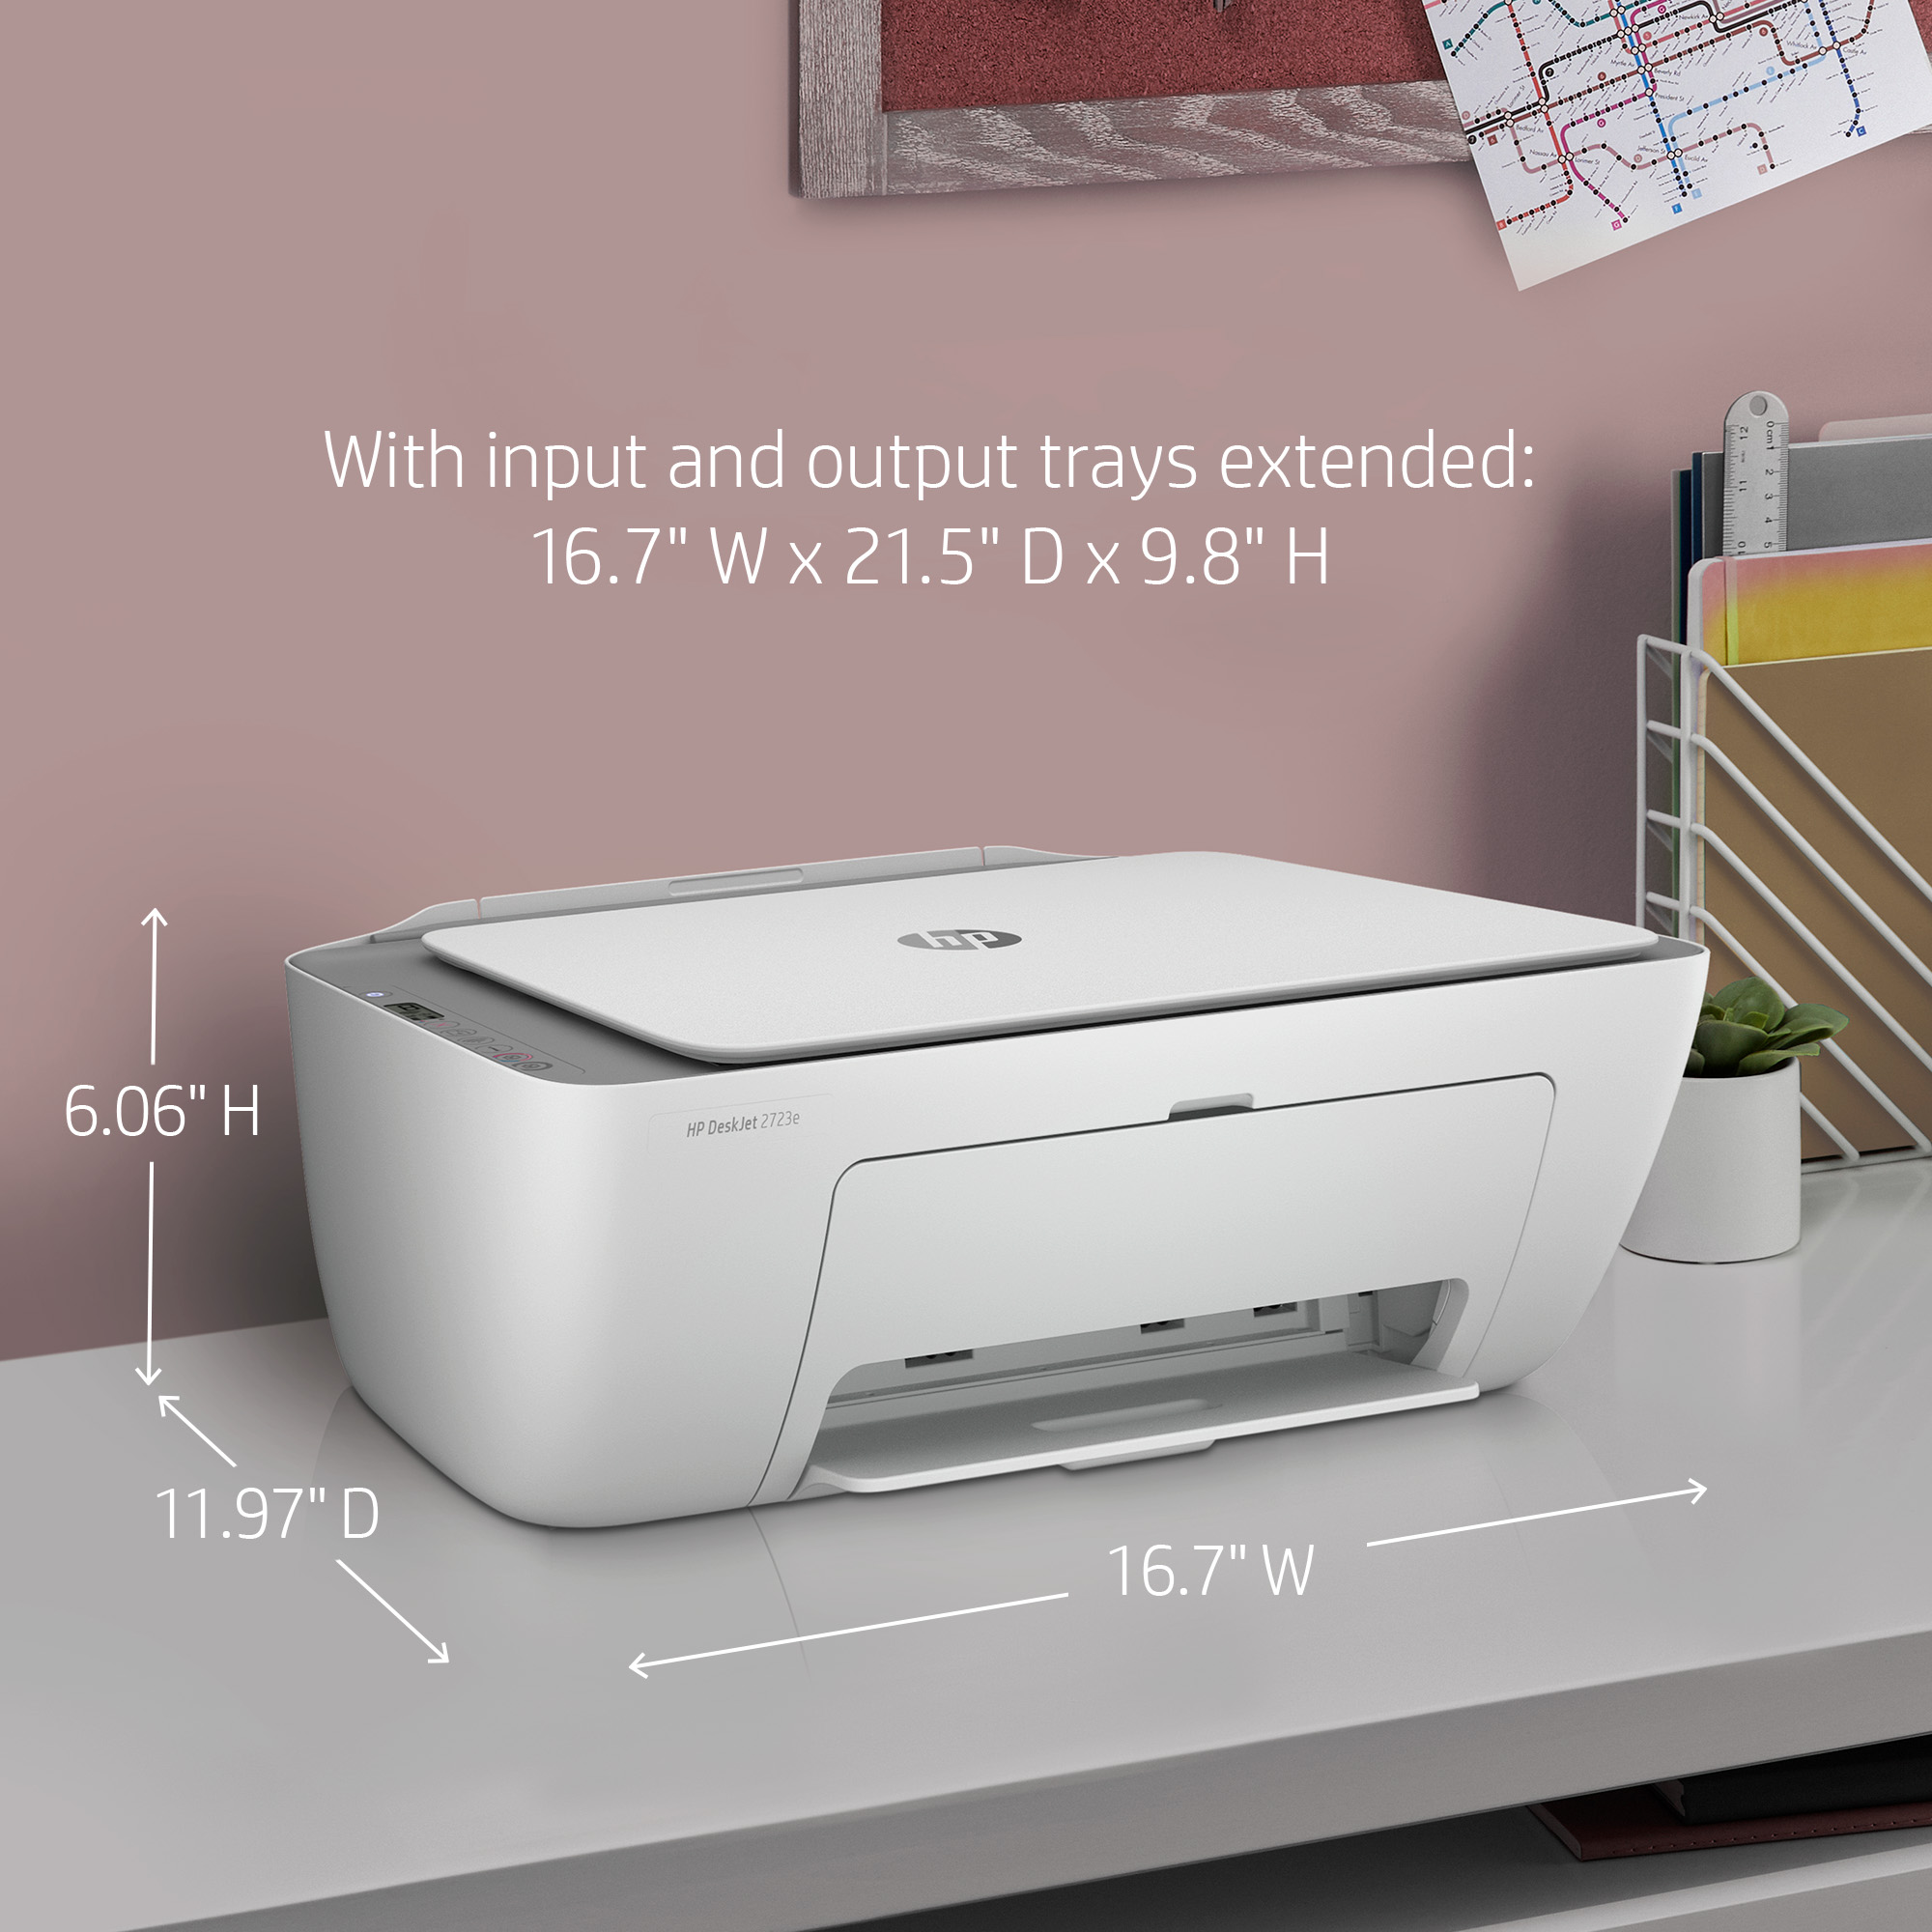 HP DeskJet 2723e All-in-One Wireless Color Inkjet Printer with 9 Months Instant Ink Included with HP+ - image 9 of 10